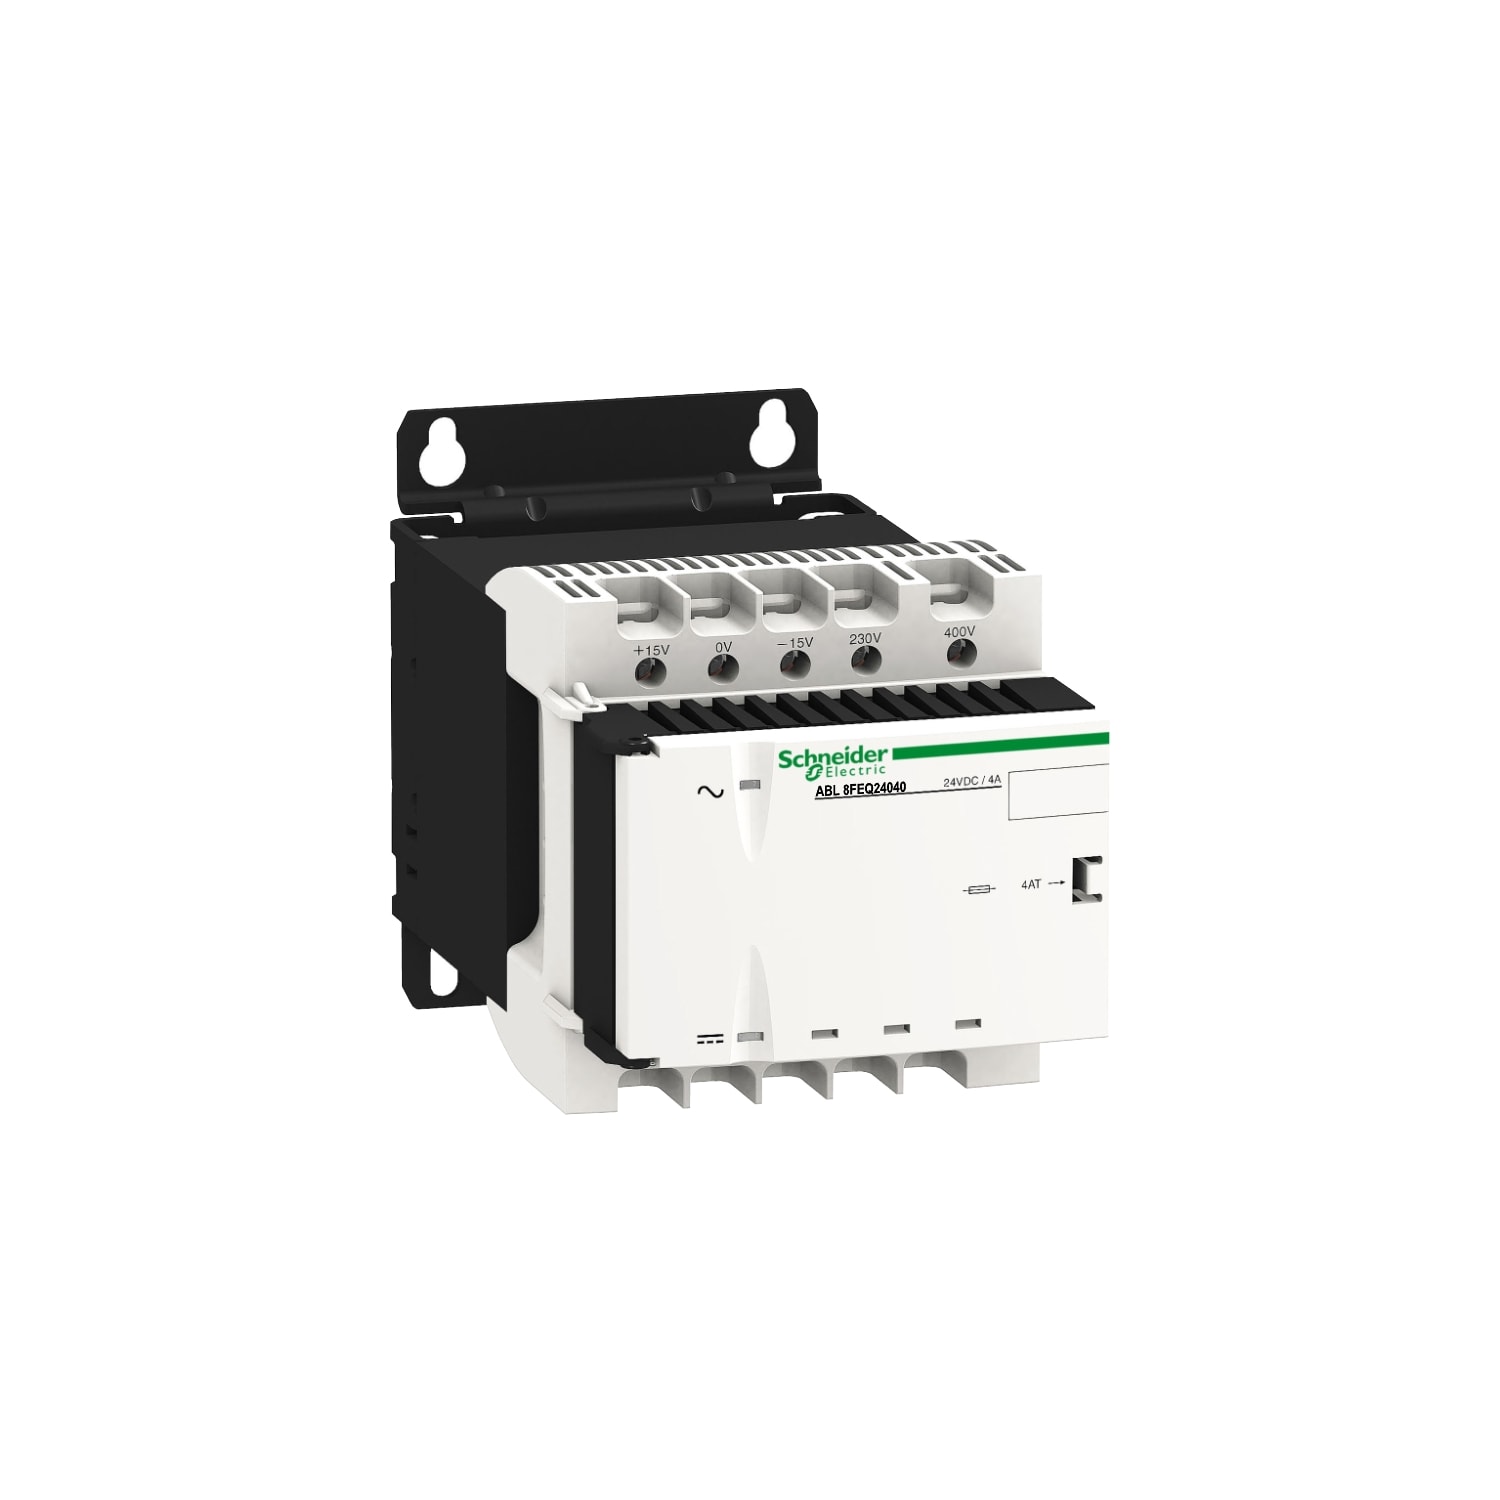 Schneider Electric - Phaseo - alimentation filtree et rectifiee - mono-biphase - 400Vca - 24V - 4A